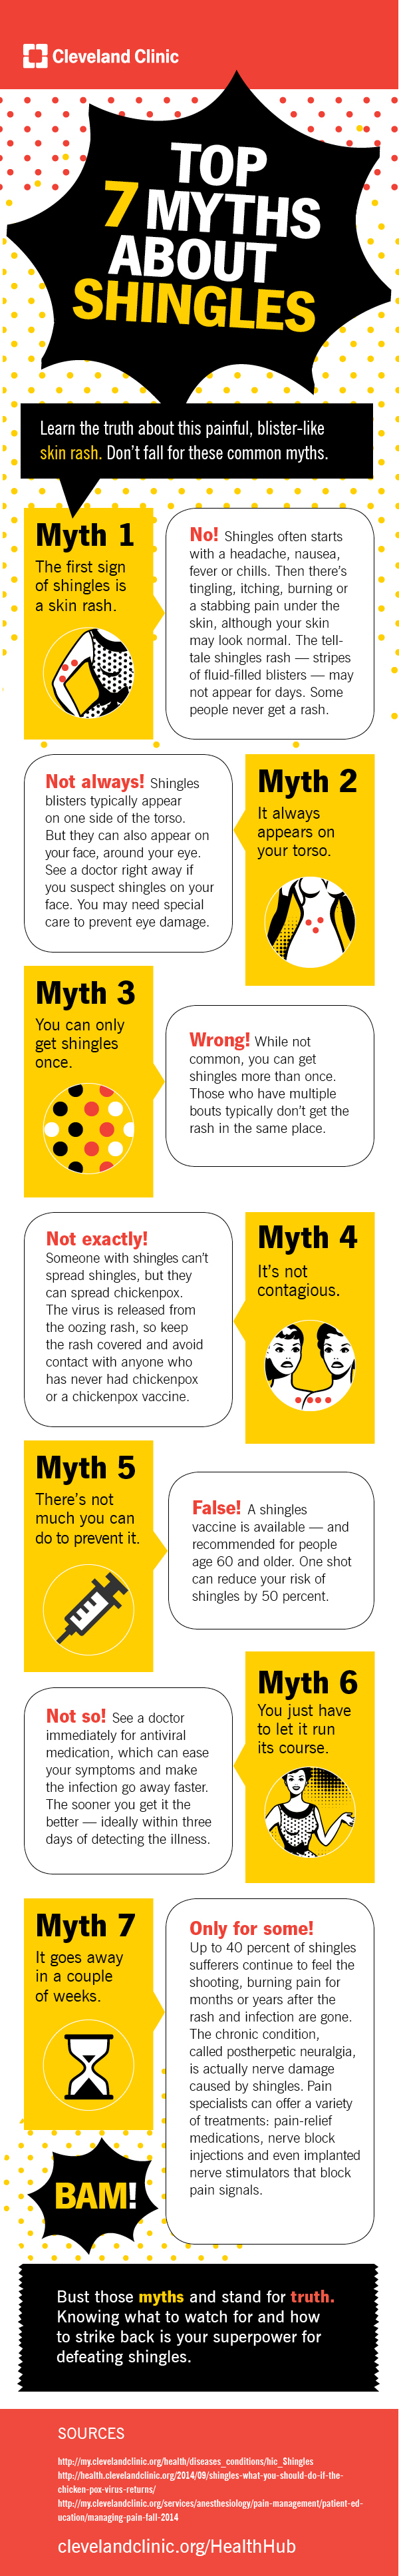 7 Myths About Shingles